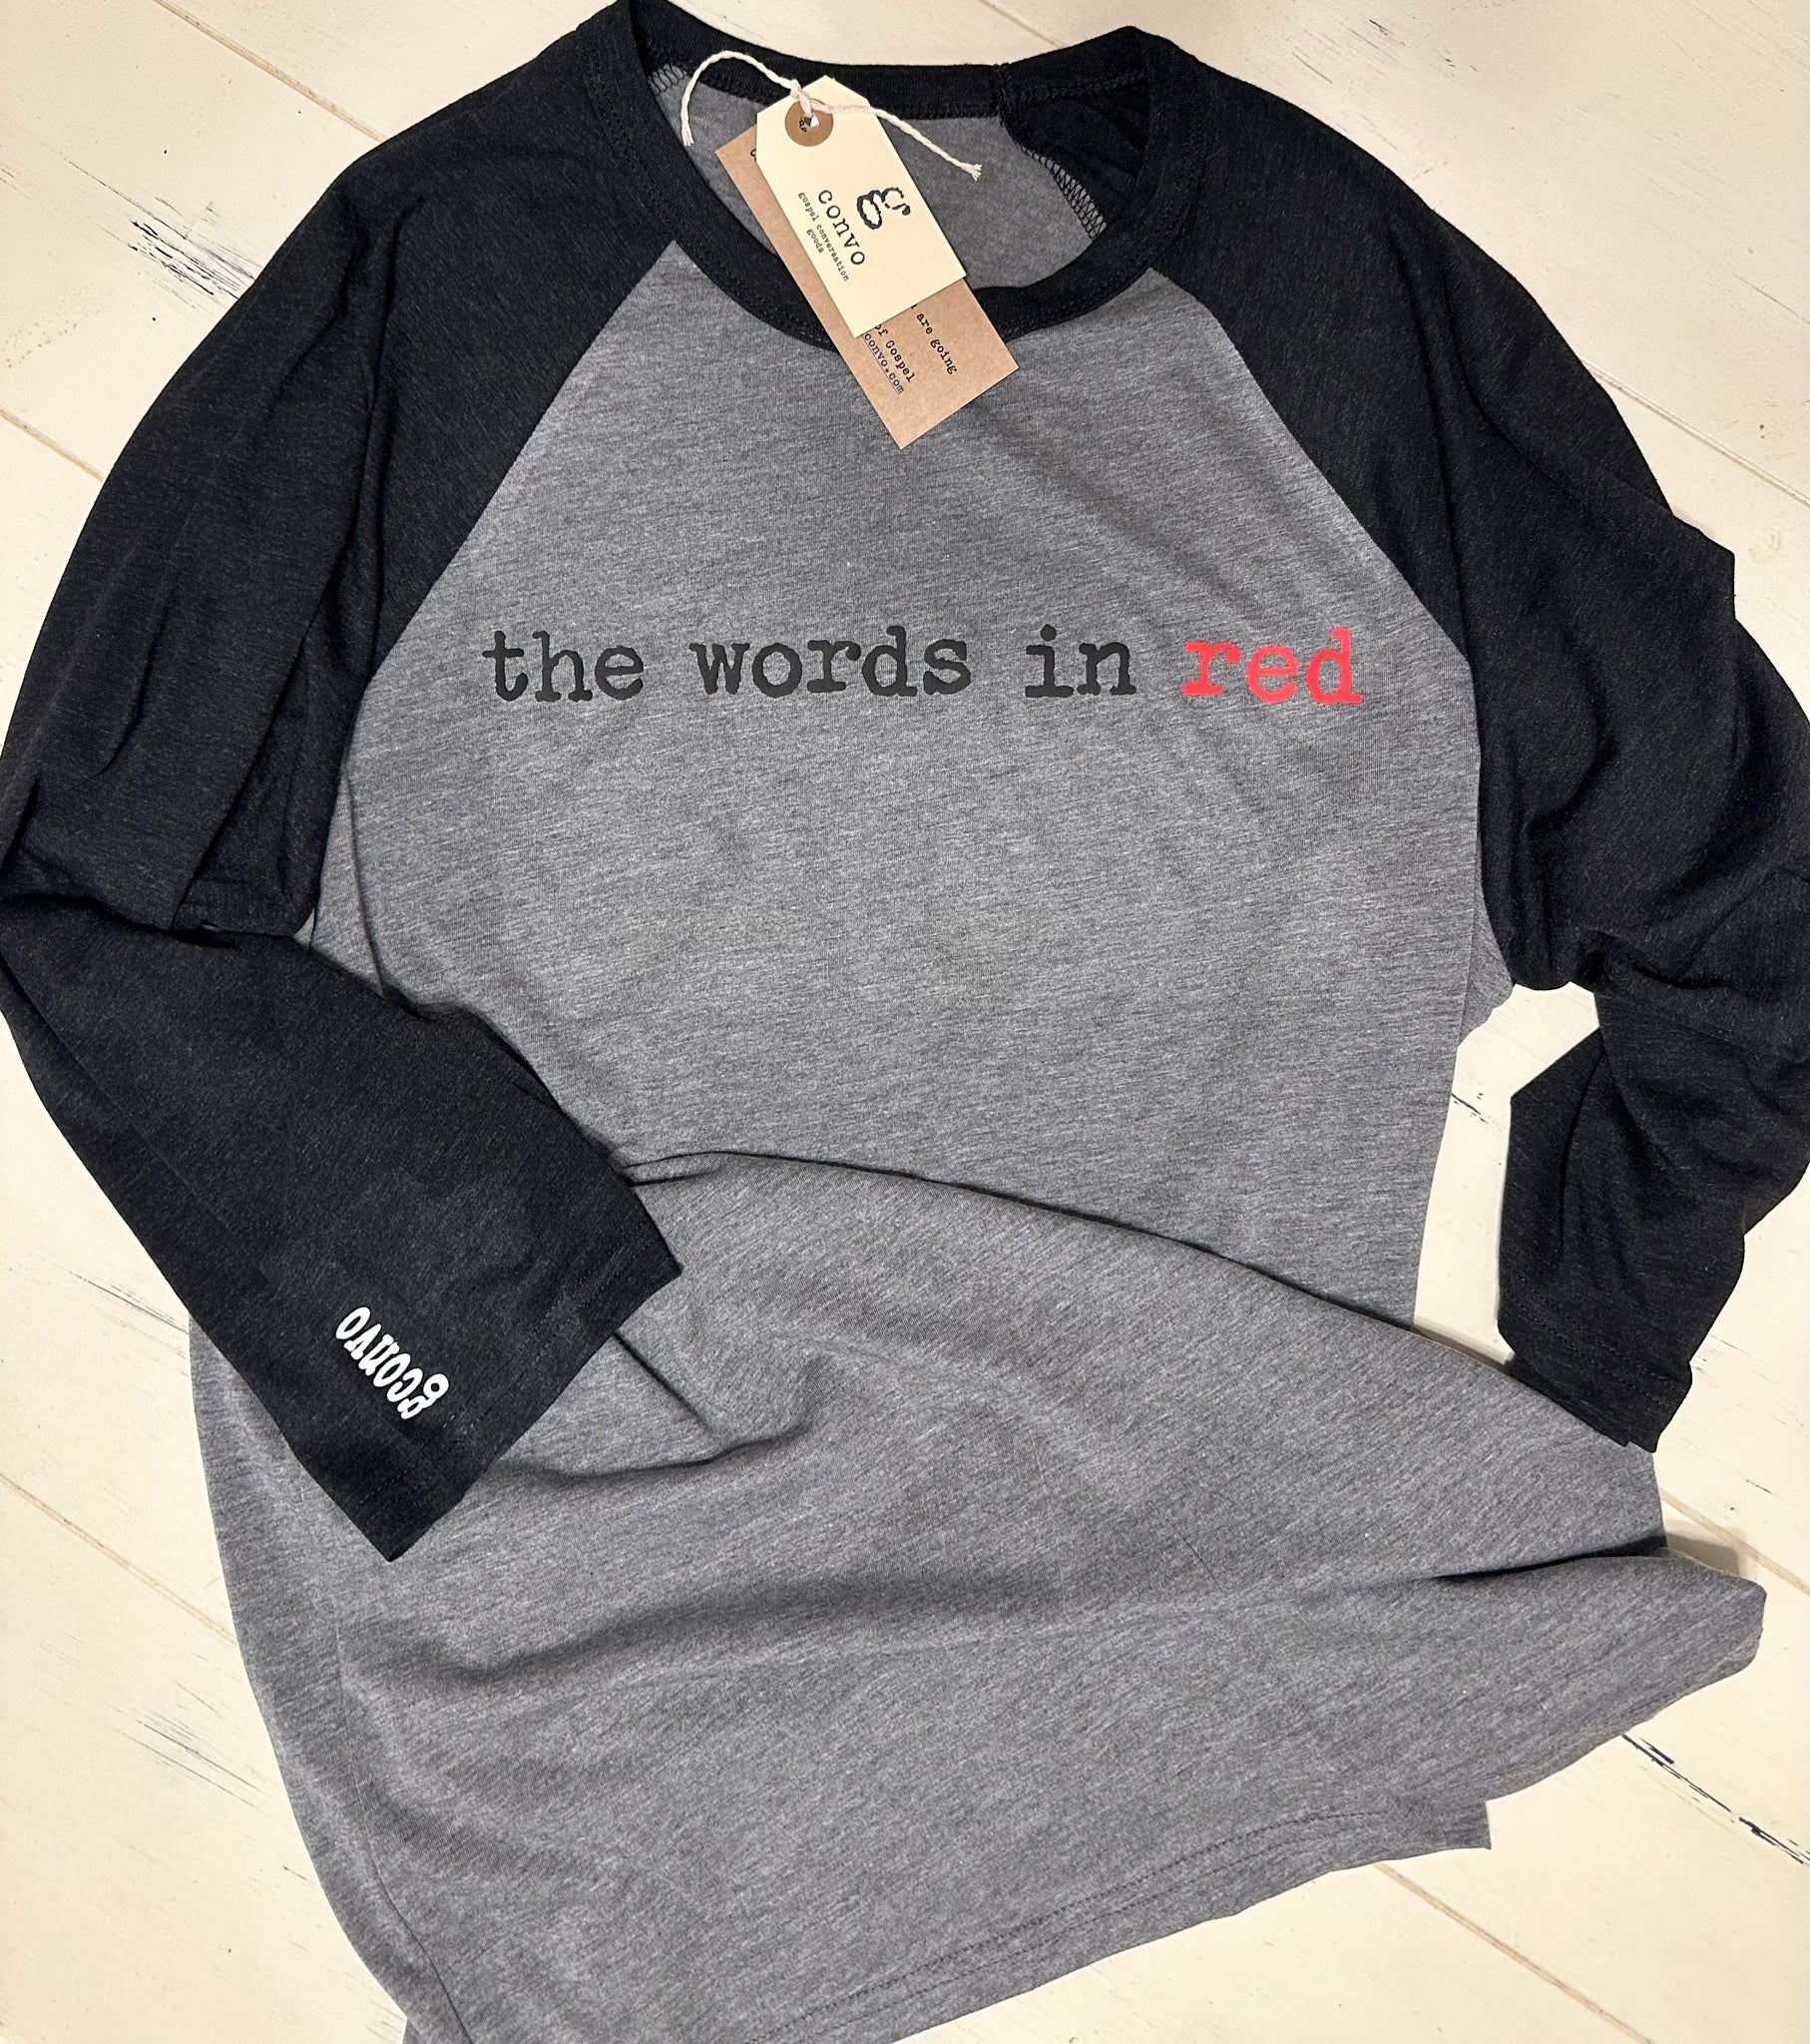 Words in Red. 3/4 Sleeve Raglan, Heather Charcoal, Gray, TriBlend, Unisex